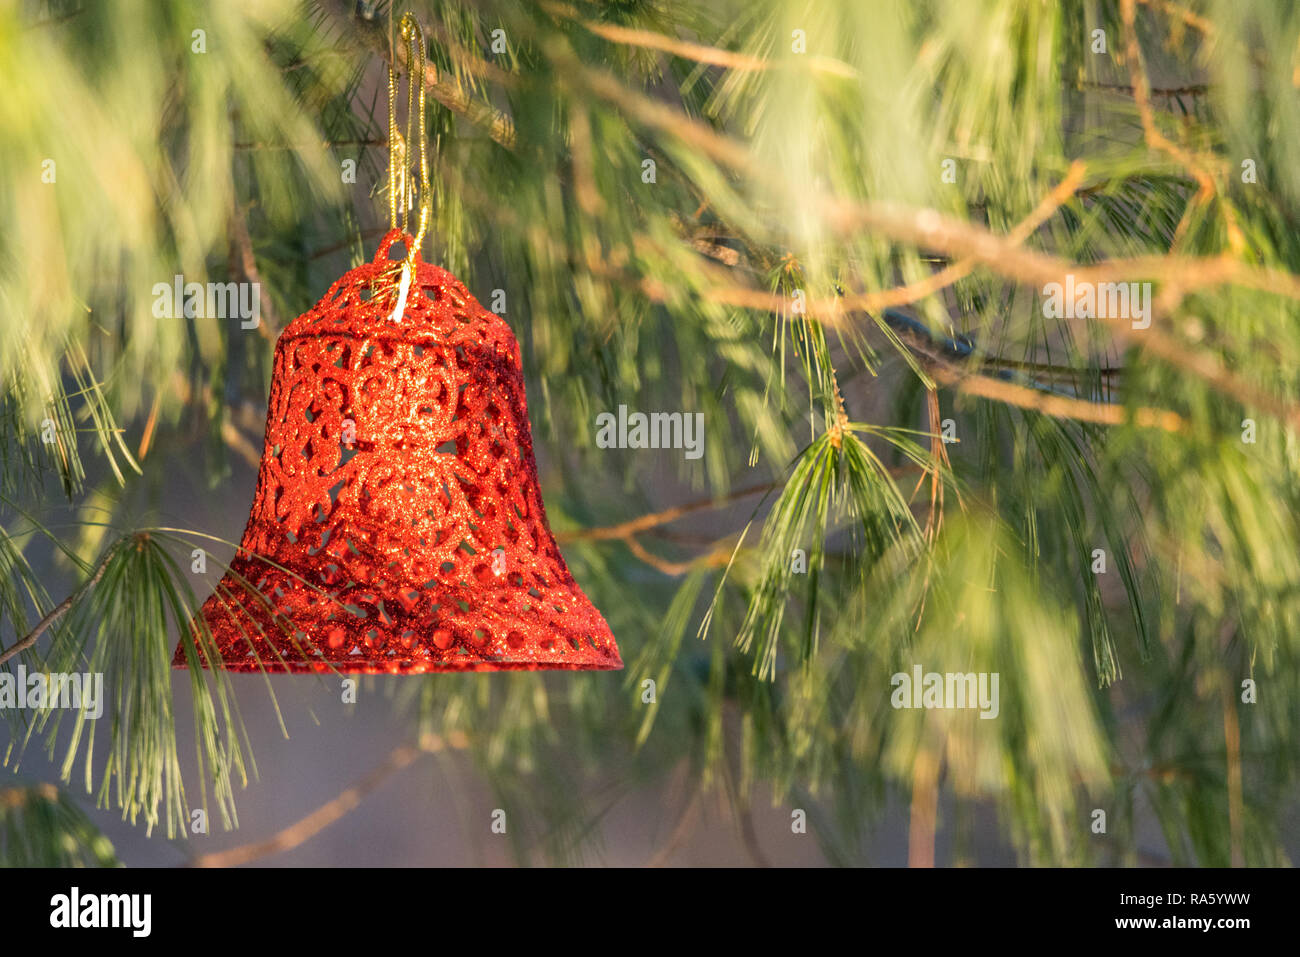 Sunlight shines on Christmas bell ornament outdoors hanging on a live pine tree in winter. Stock Photo